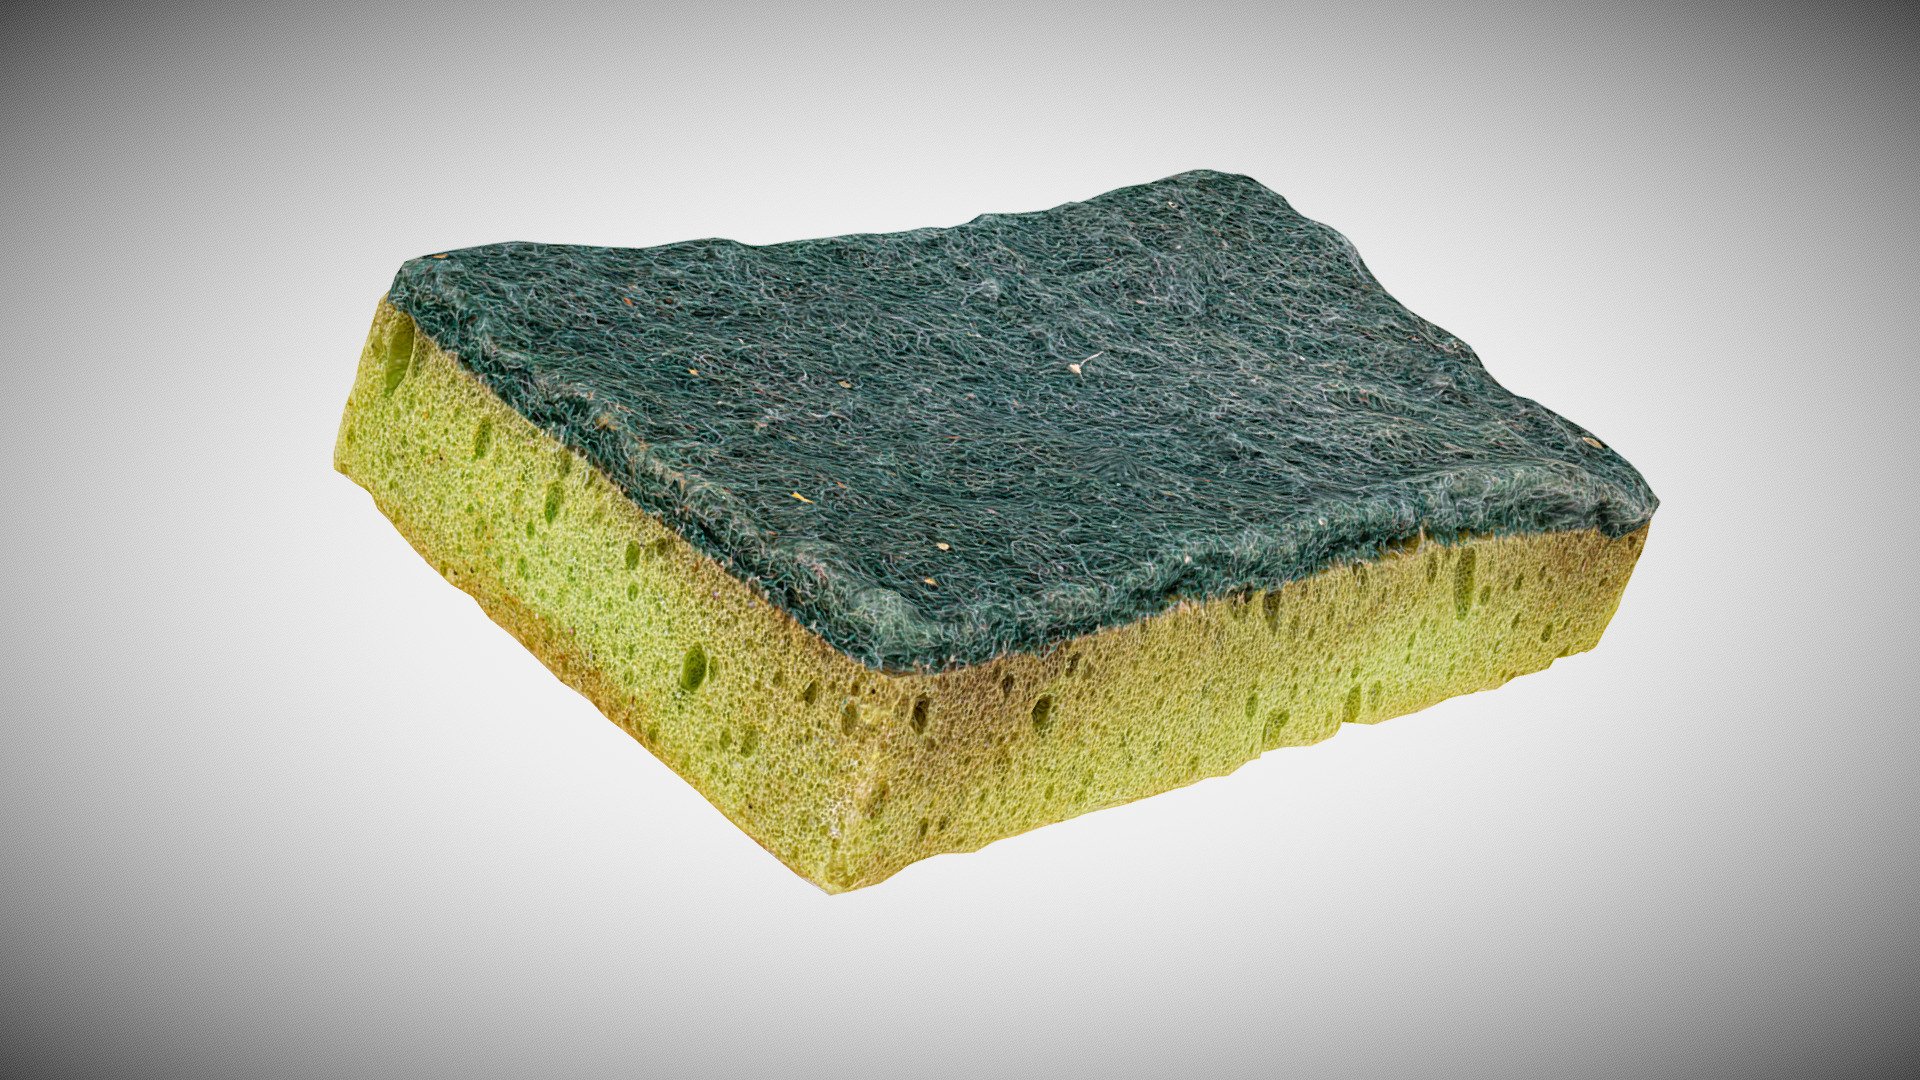 3D scan of an old heavily used dirty kitchen sponge used for washing dishes. Greenish color, small cavities, two sided material.

Reconstructed in RC from 79 DSLR images.

8k texture and normal - Dirty kitchen sponge - Buy Royalty Free 3D model by Goromor (@gorllu) 3d model